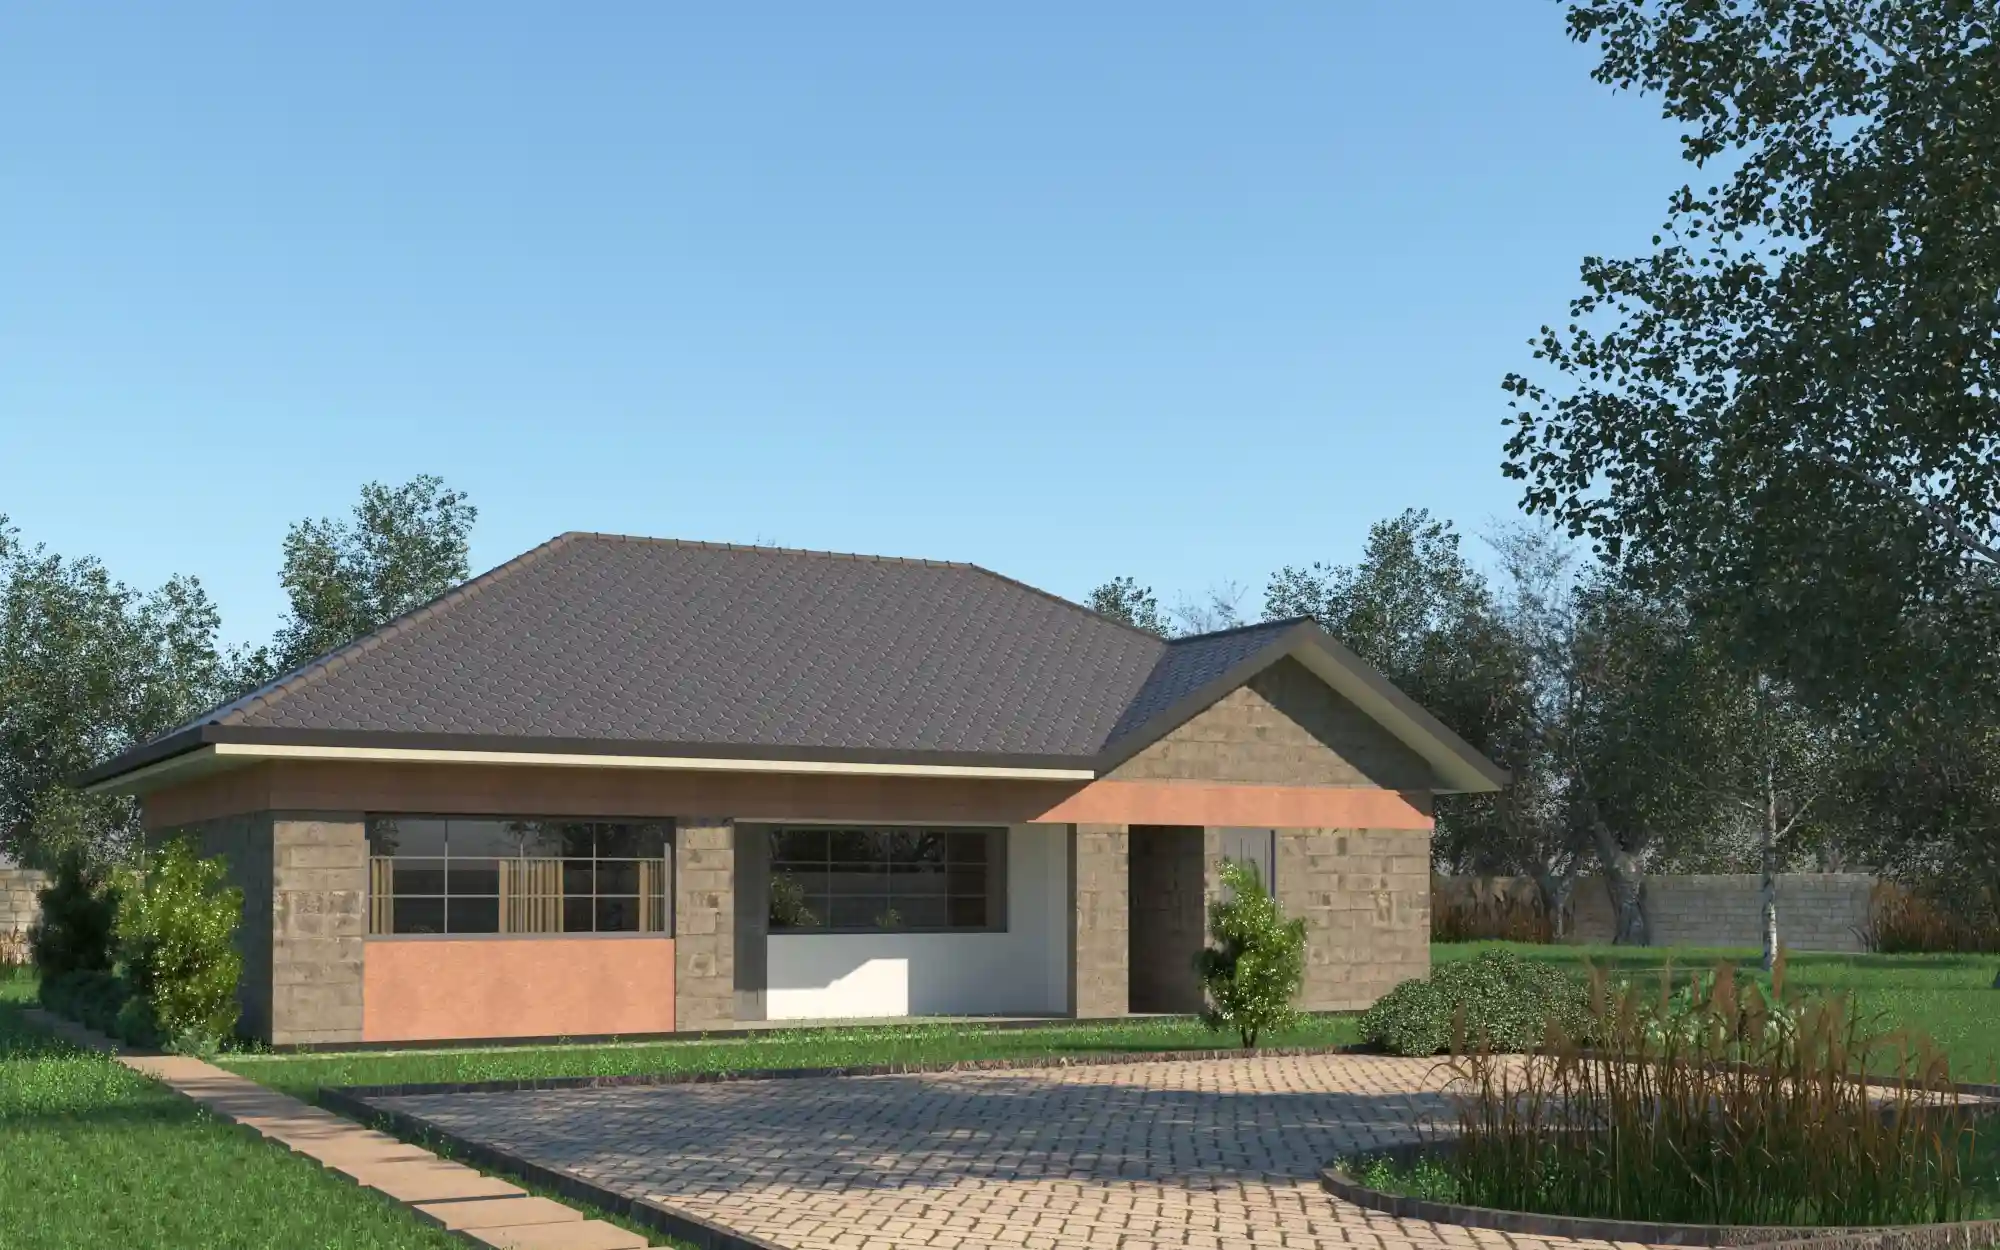 4 Bedroom Jenga Pole Pole Bungalow - ID 4171 - Phase 3 Front from Inuua Tujenge house plans with 4 bedrooms and 2 bathrooms. ( jengapolepole )